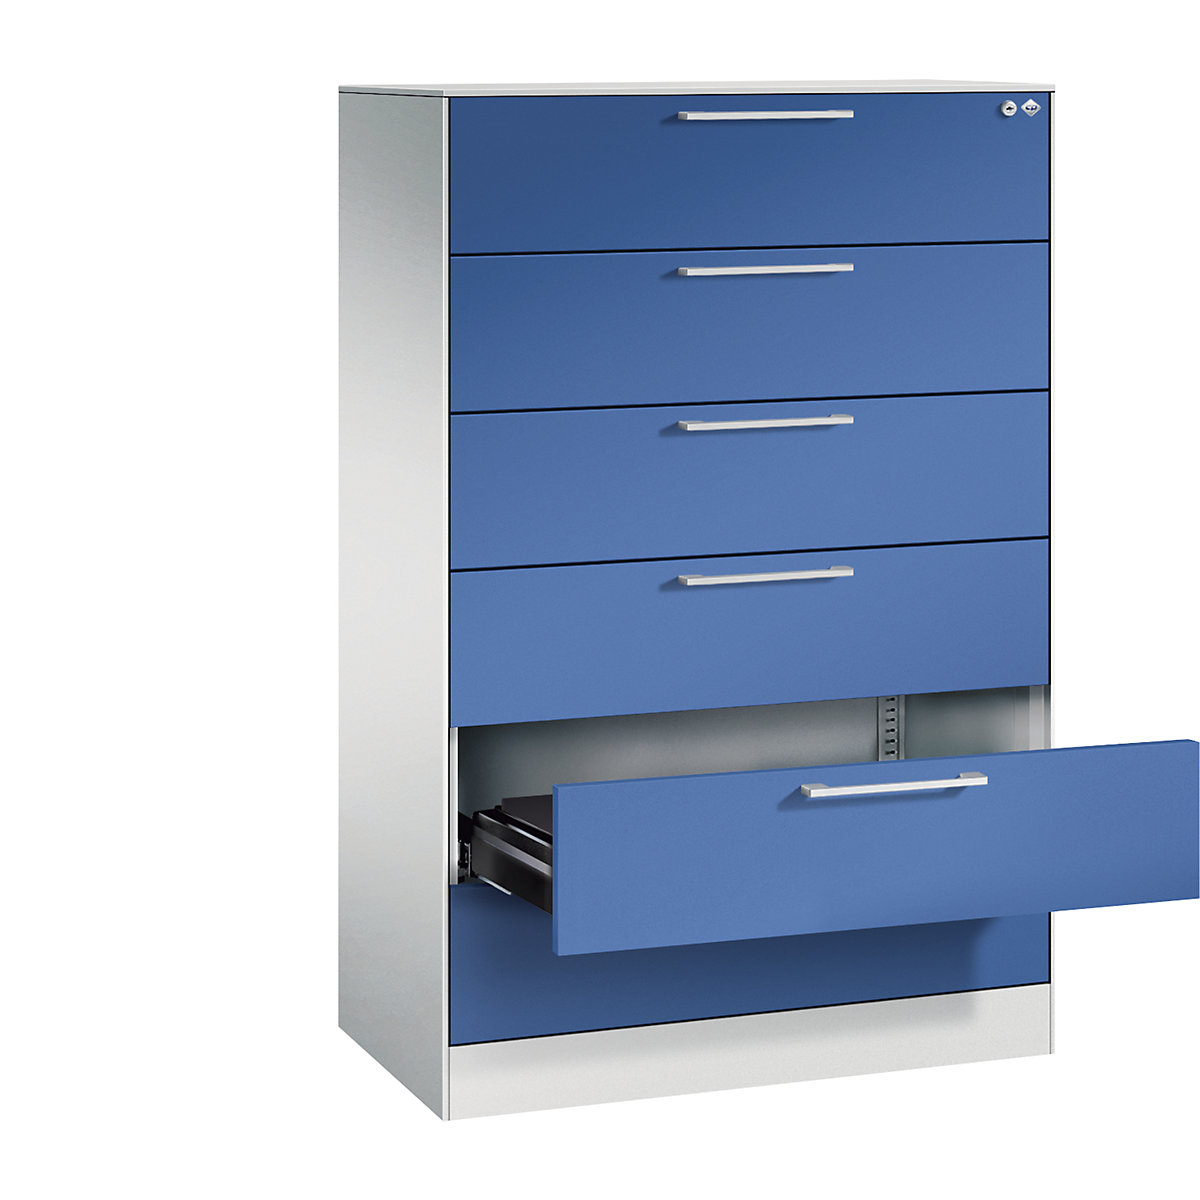 ASISTO card file cabinet – C+P, height 1292 mm, with 6 drawers, A5 landscape, light grey/gentian blue-20